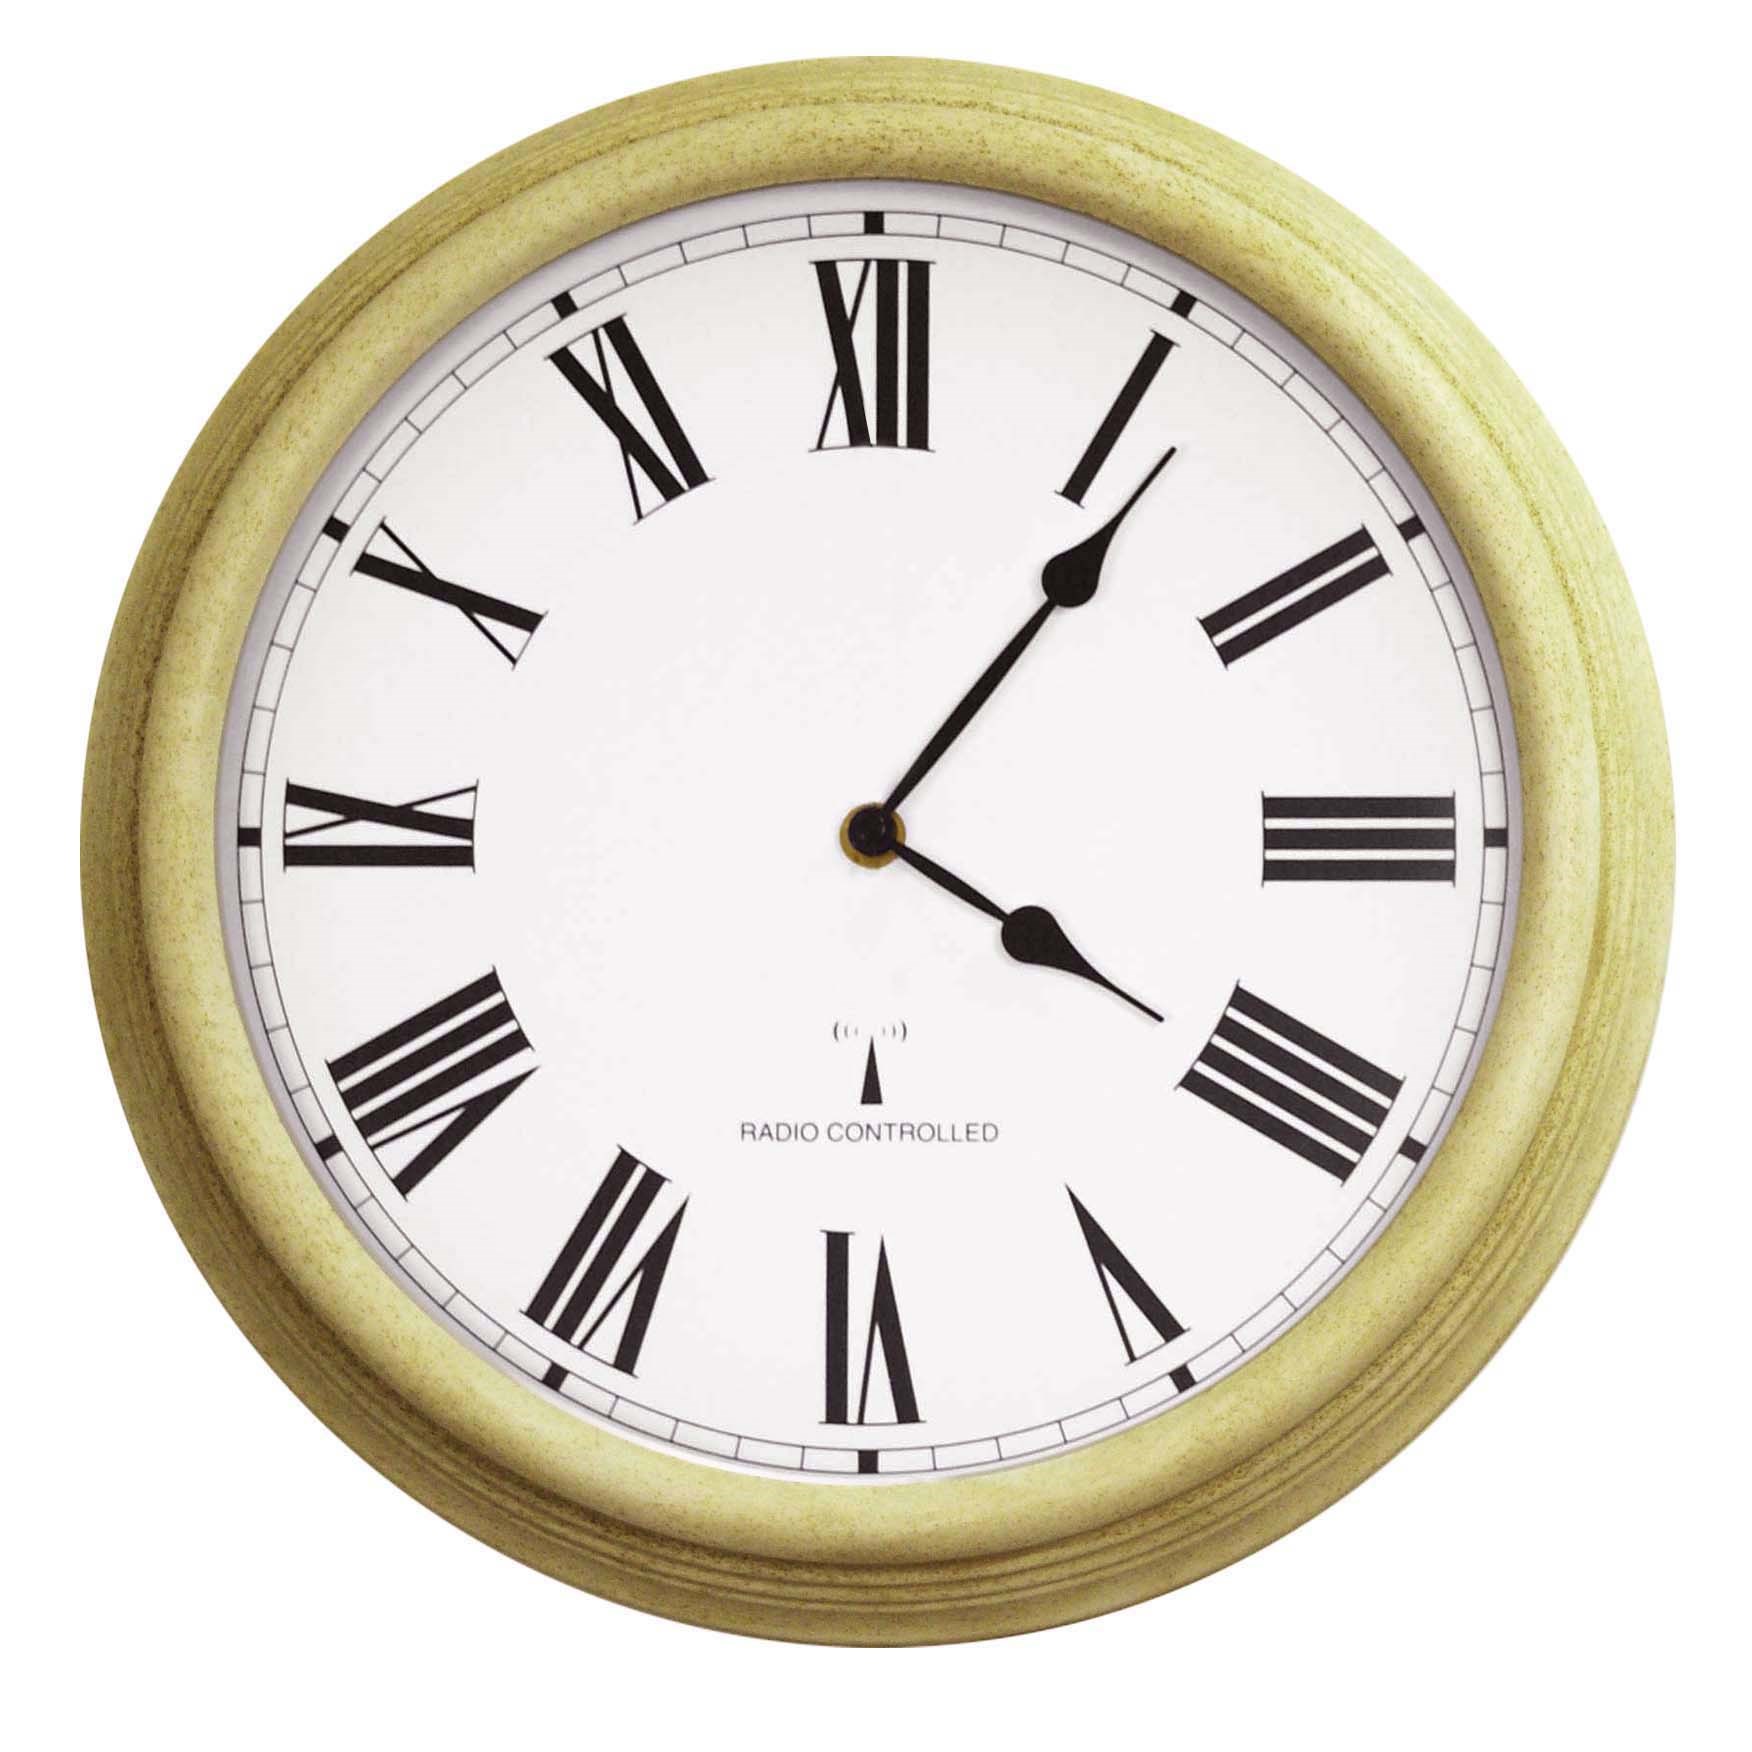 Perfect Time Radio Controlled Outdoor Garden Clock - Antique White | About Time™